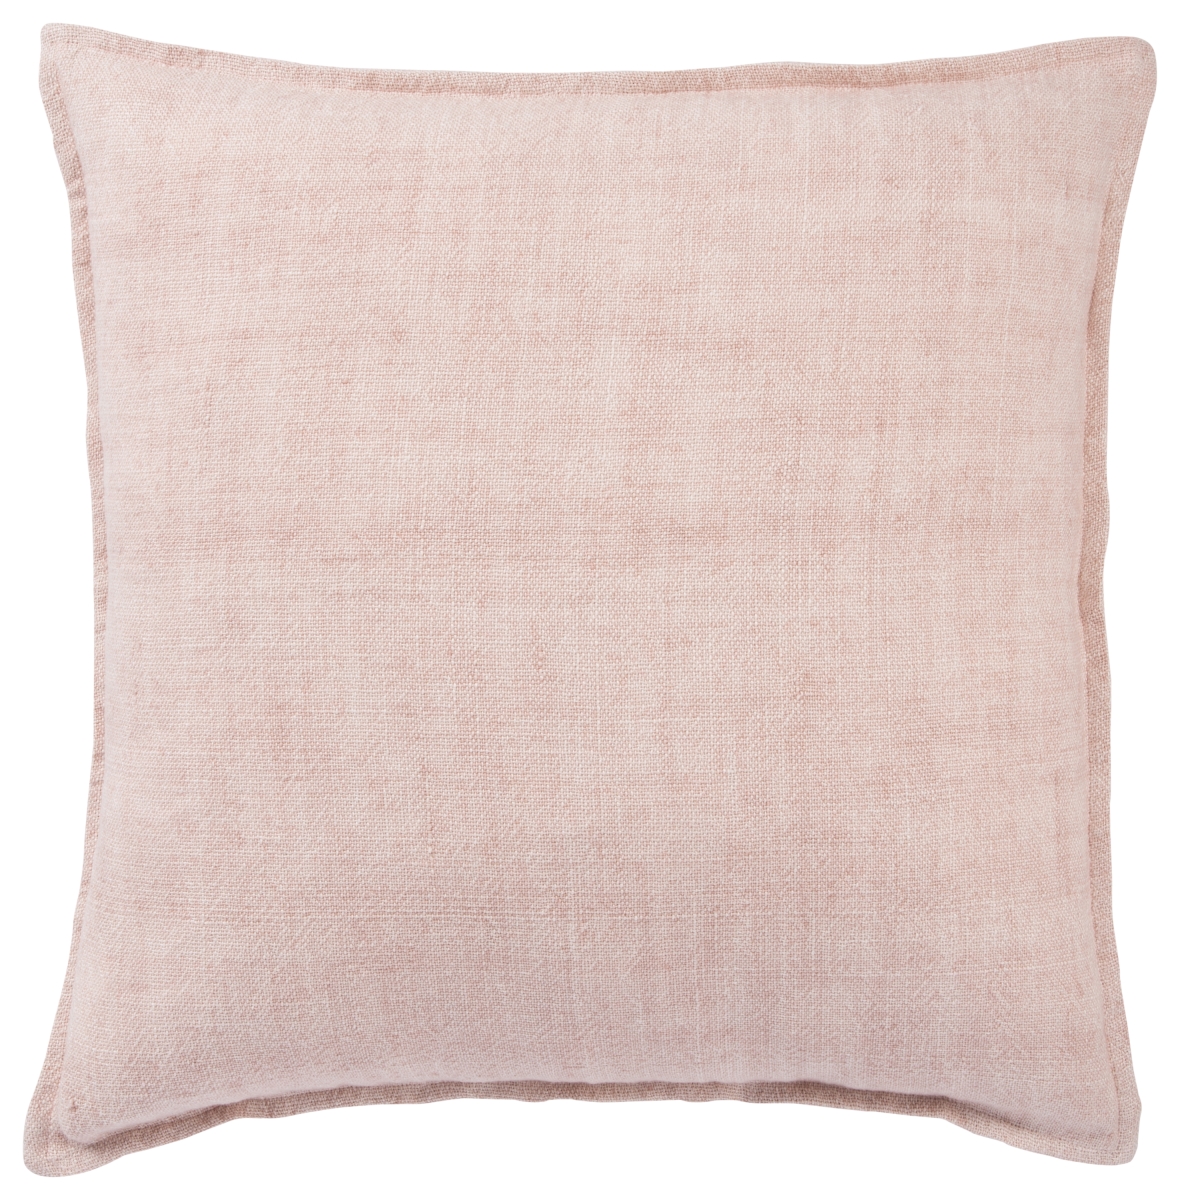 Plw103297 22 X 22 In. Burbank Blanche Solid Light Pink Poly Throw Pillow